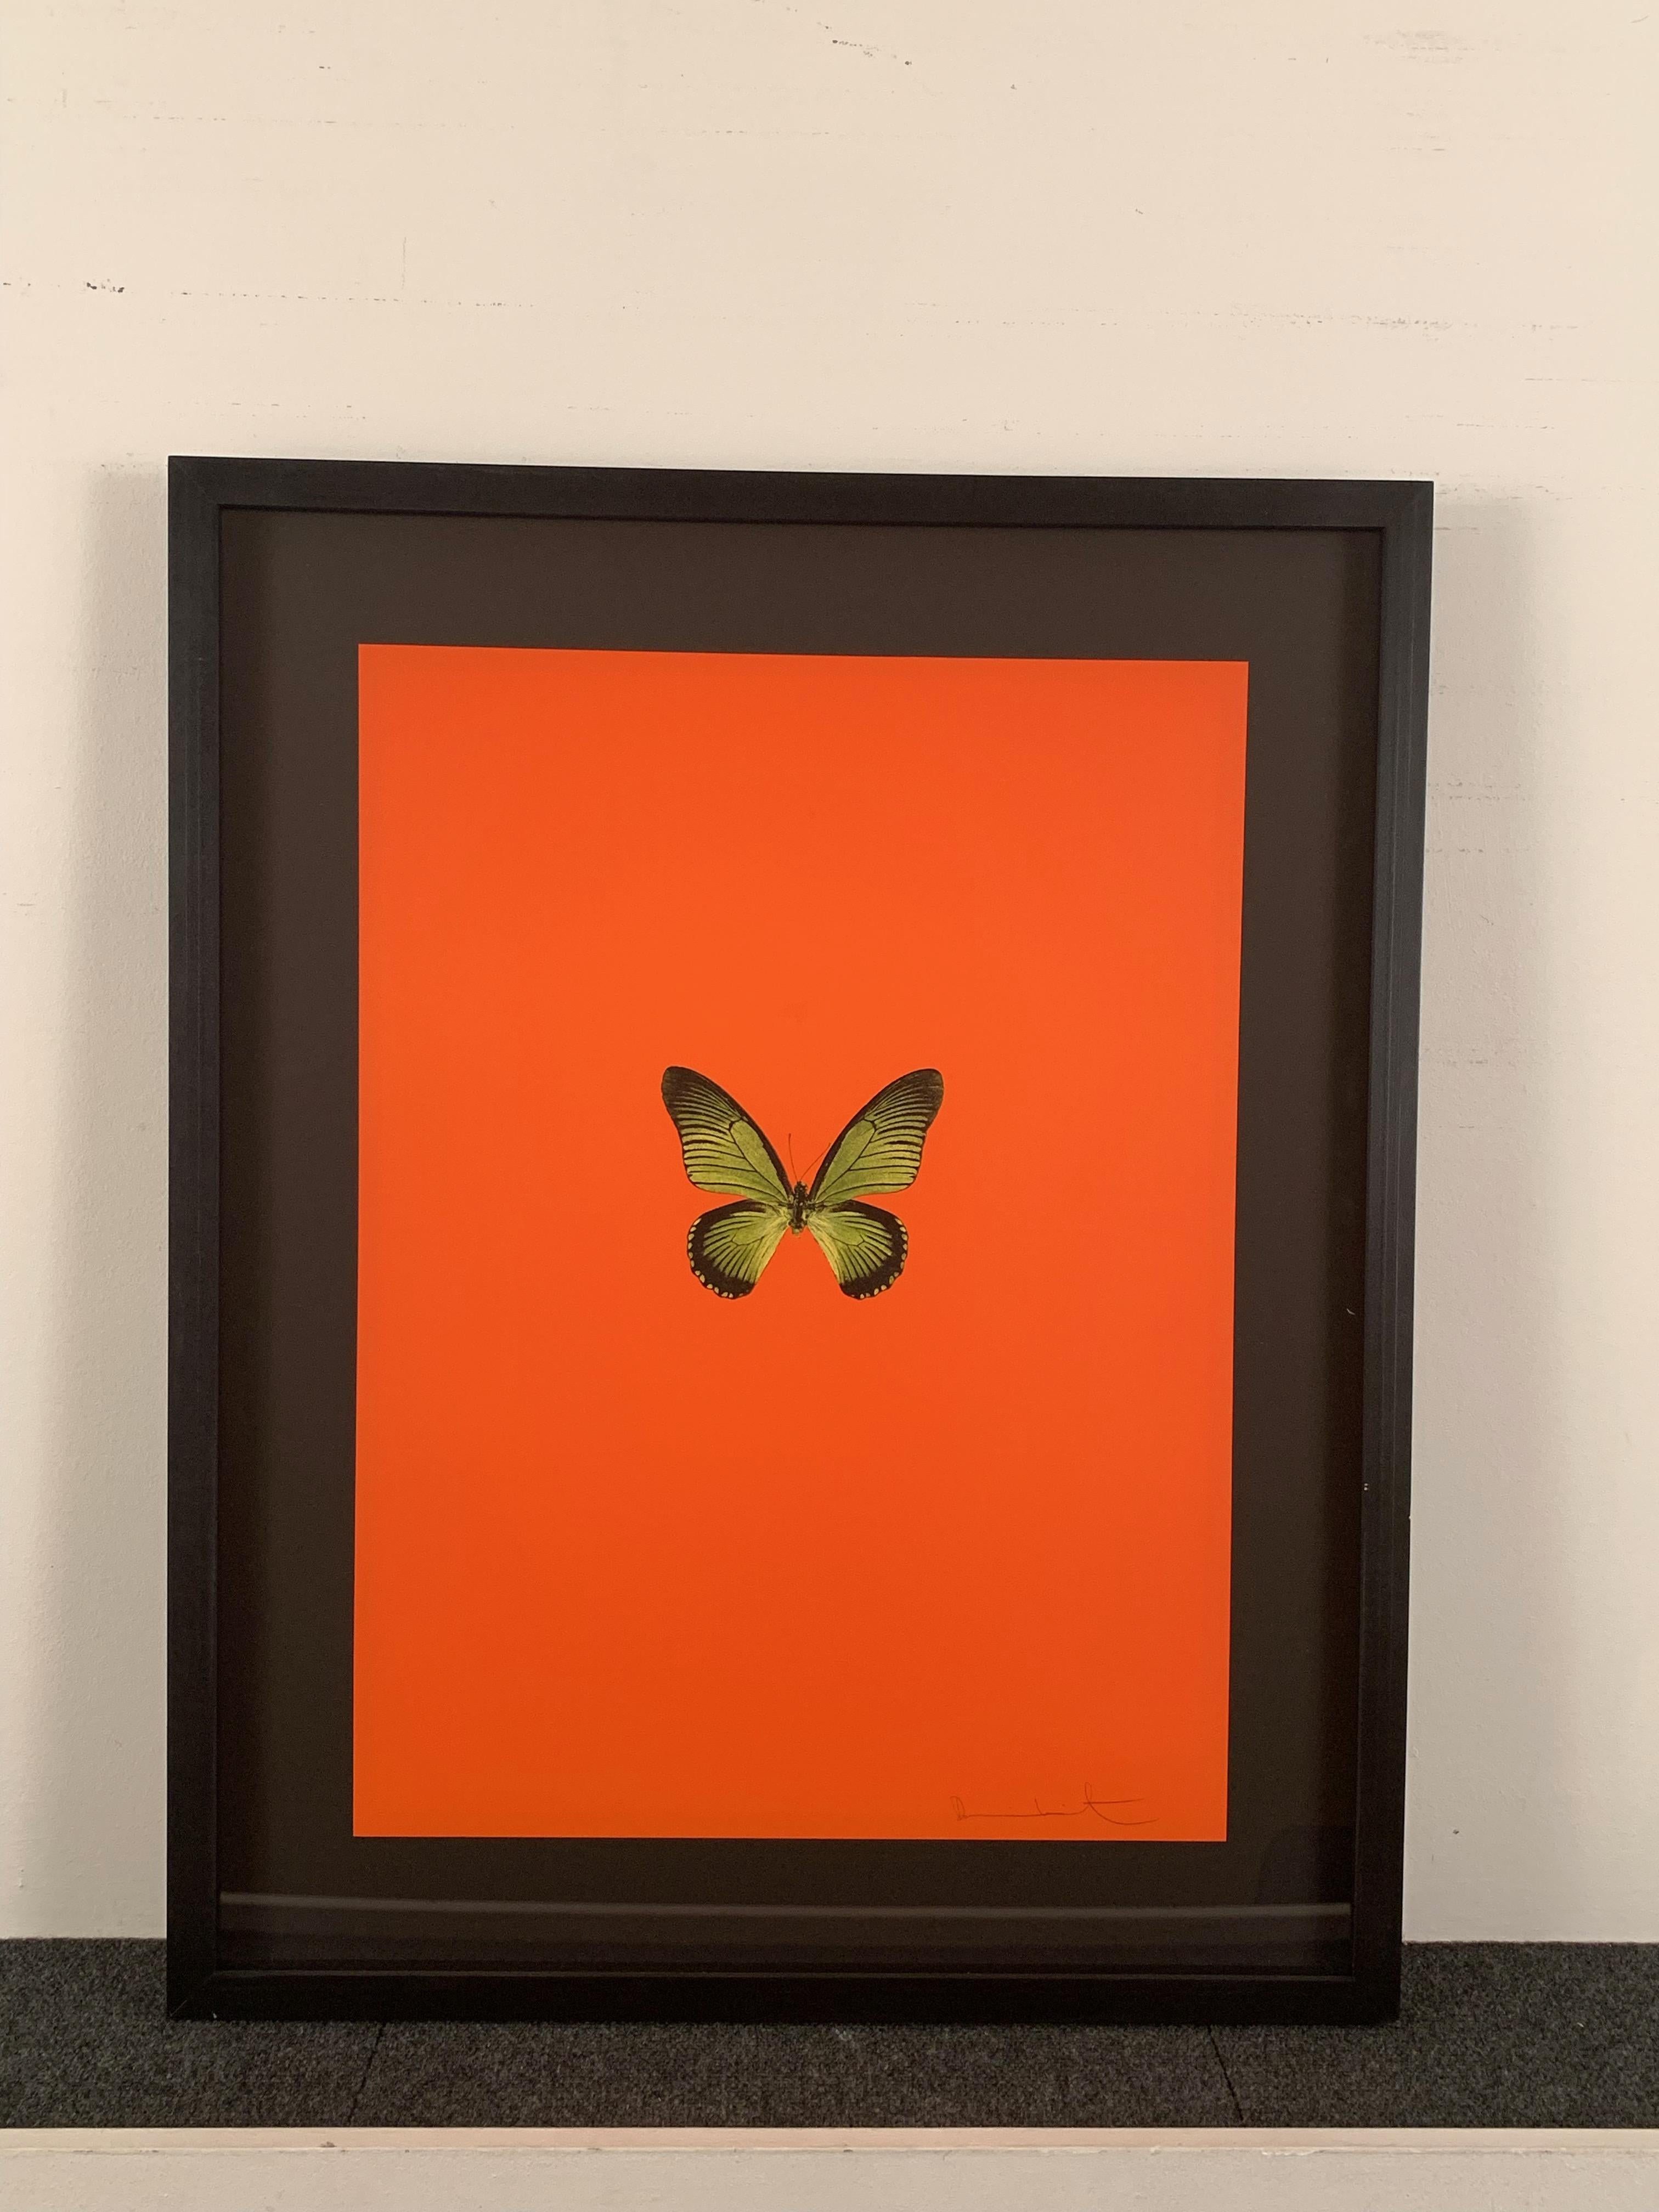 Six Butterflies I - Print by Damien Hirst